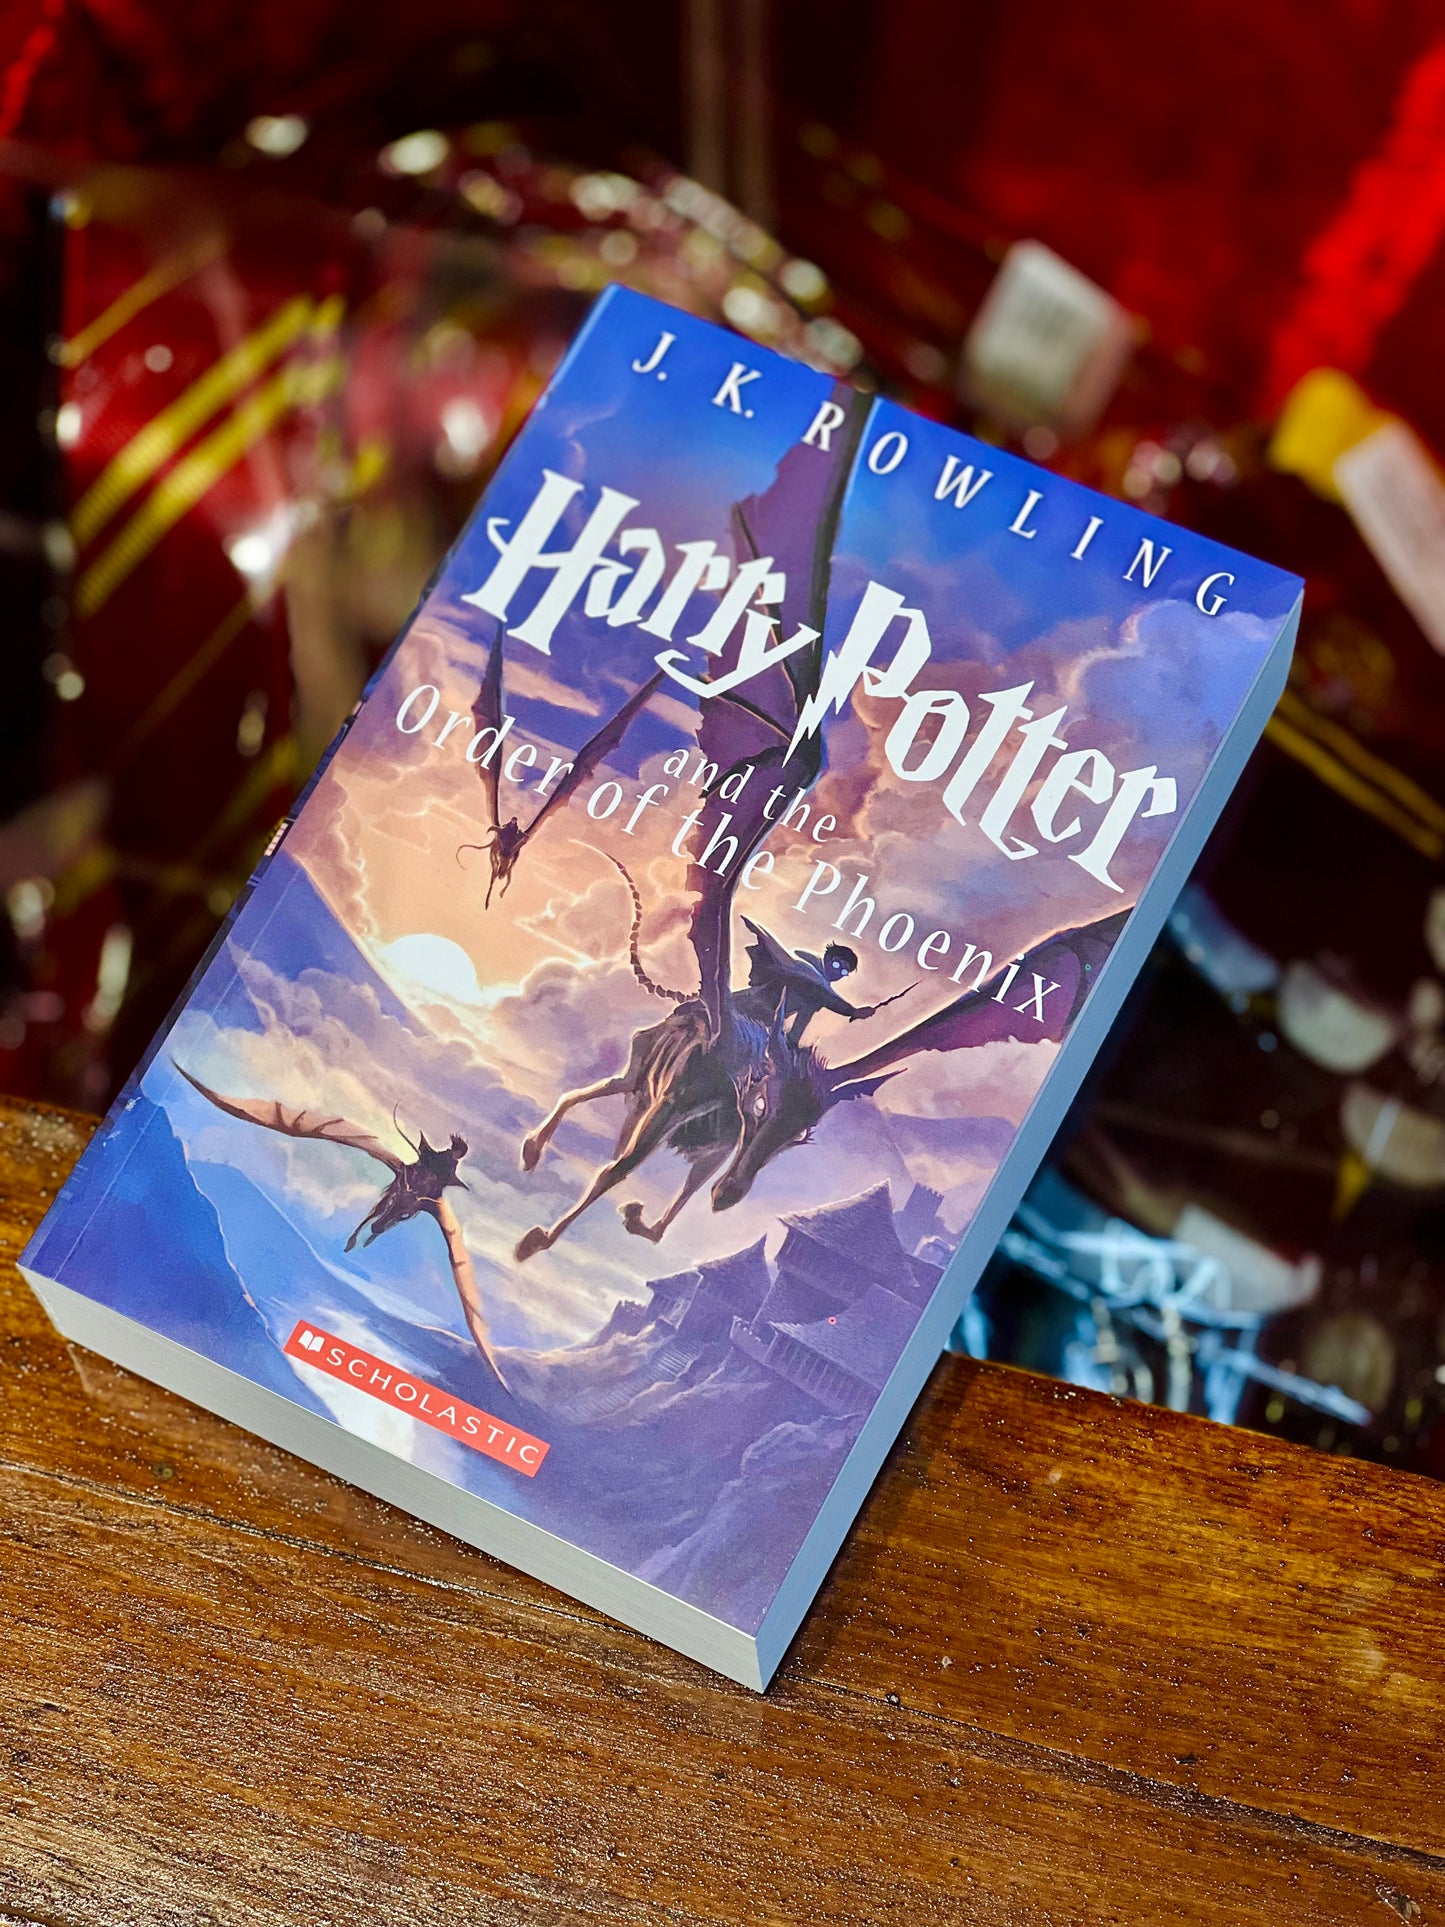 The full Harry Potter edition in English